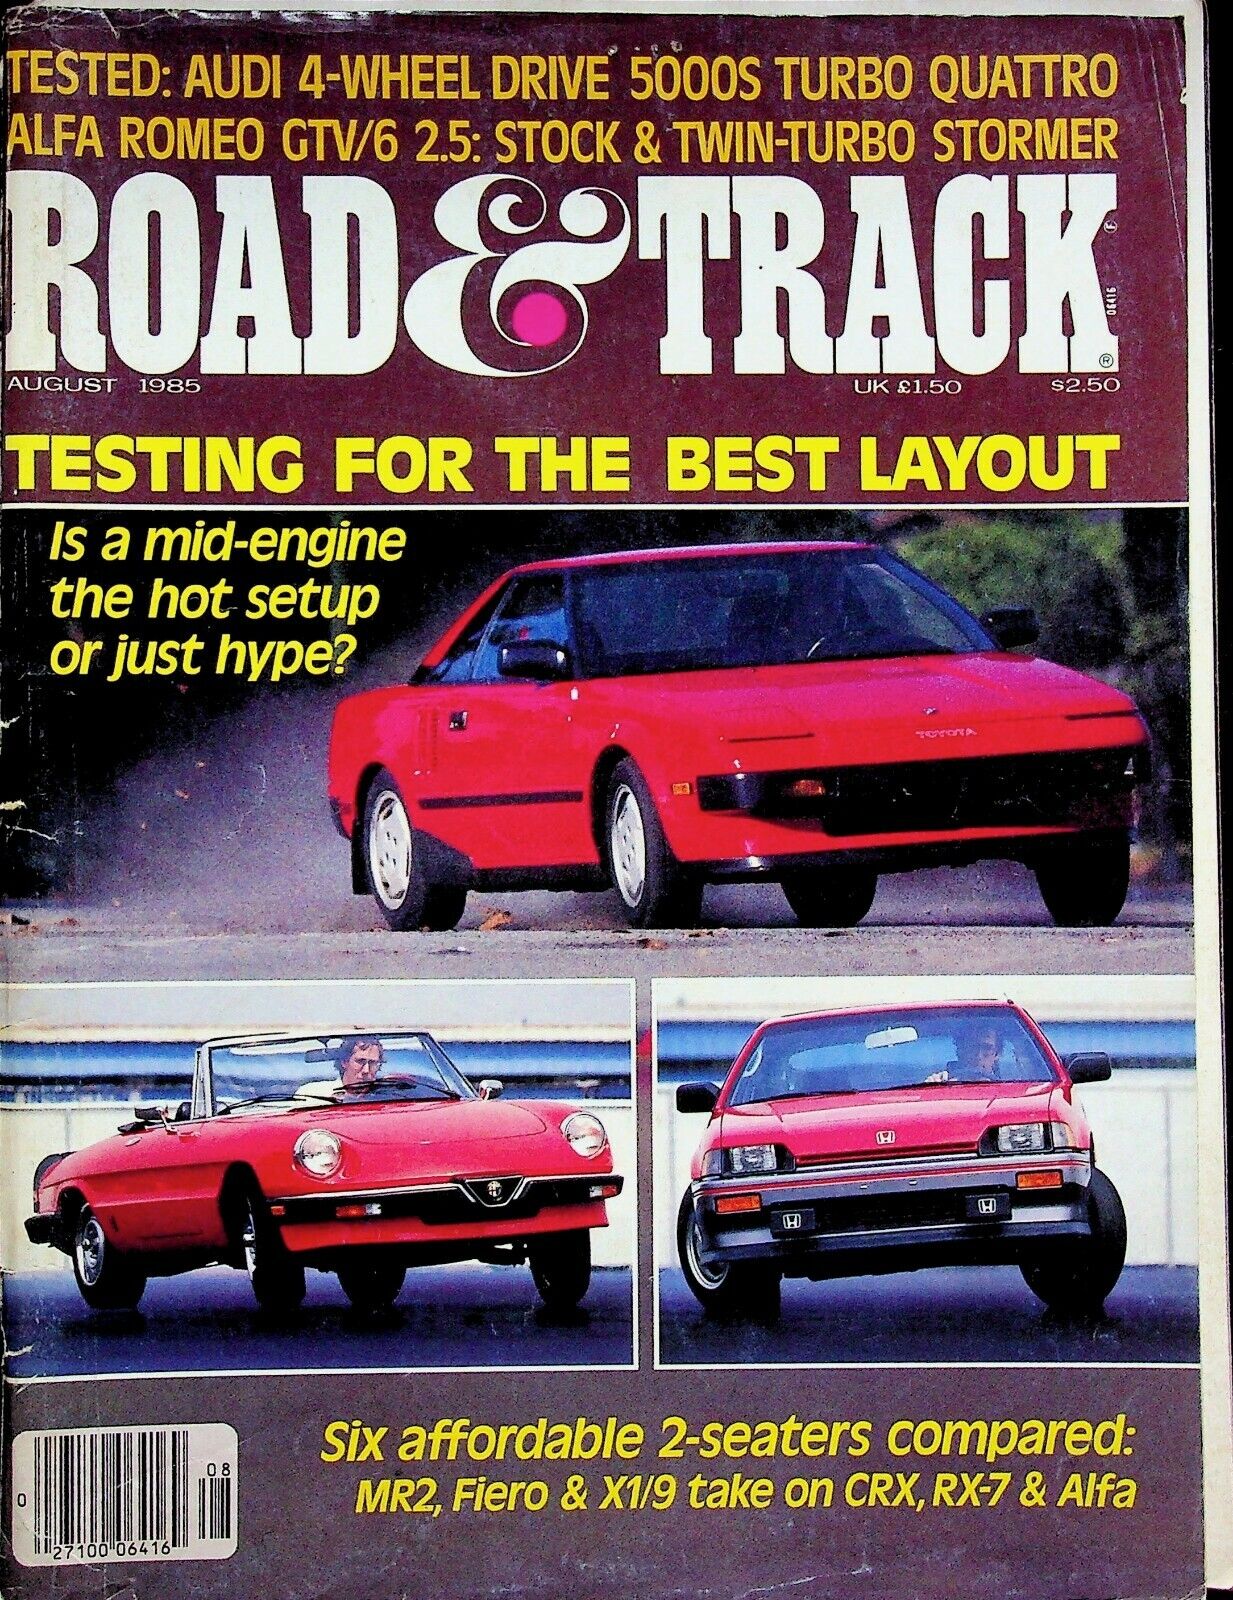 SIX AFFORDABLE 2-SEATERS - ROAD AND DRIVER, AUGUST 1985 VOLUME 36. # 12 VINTAGE